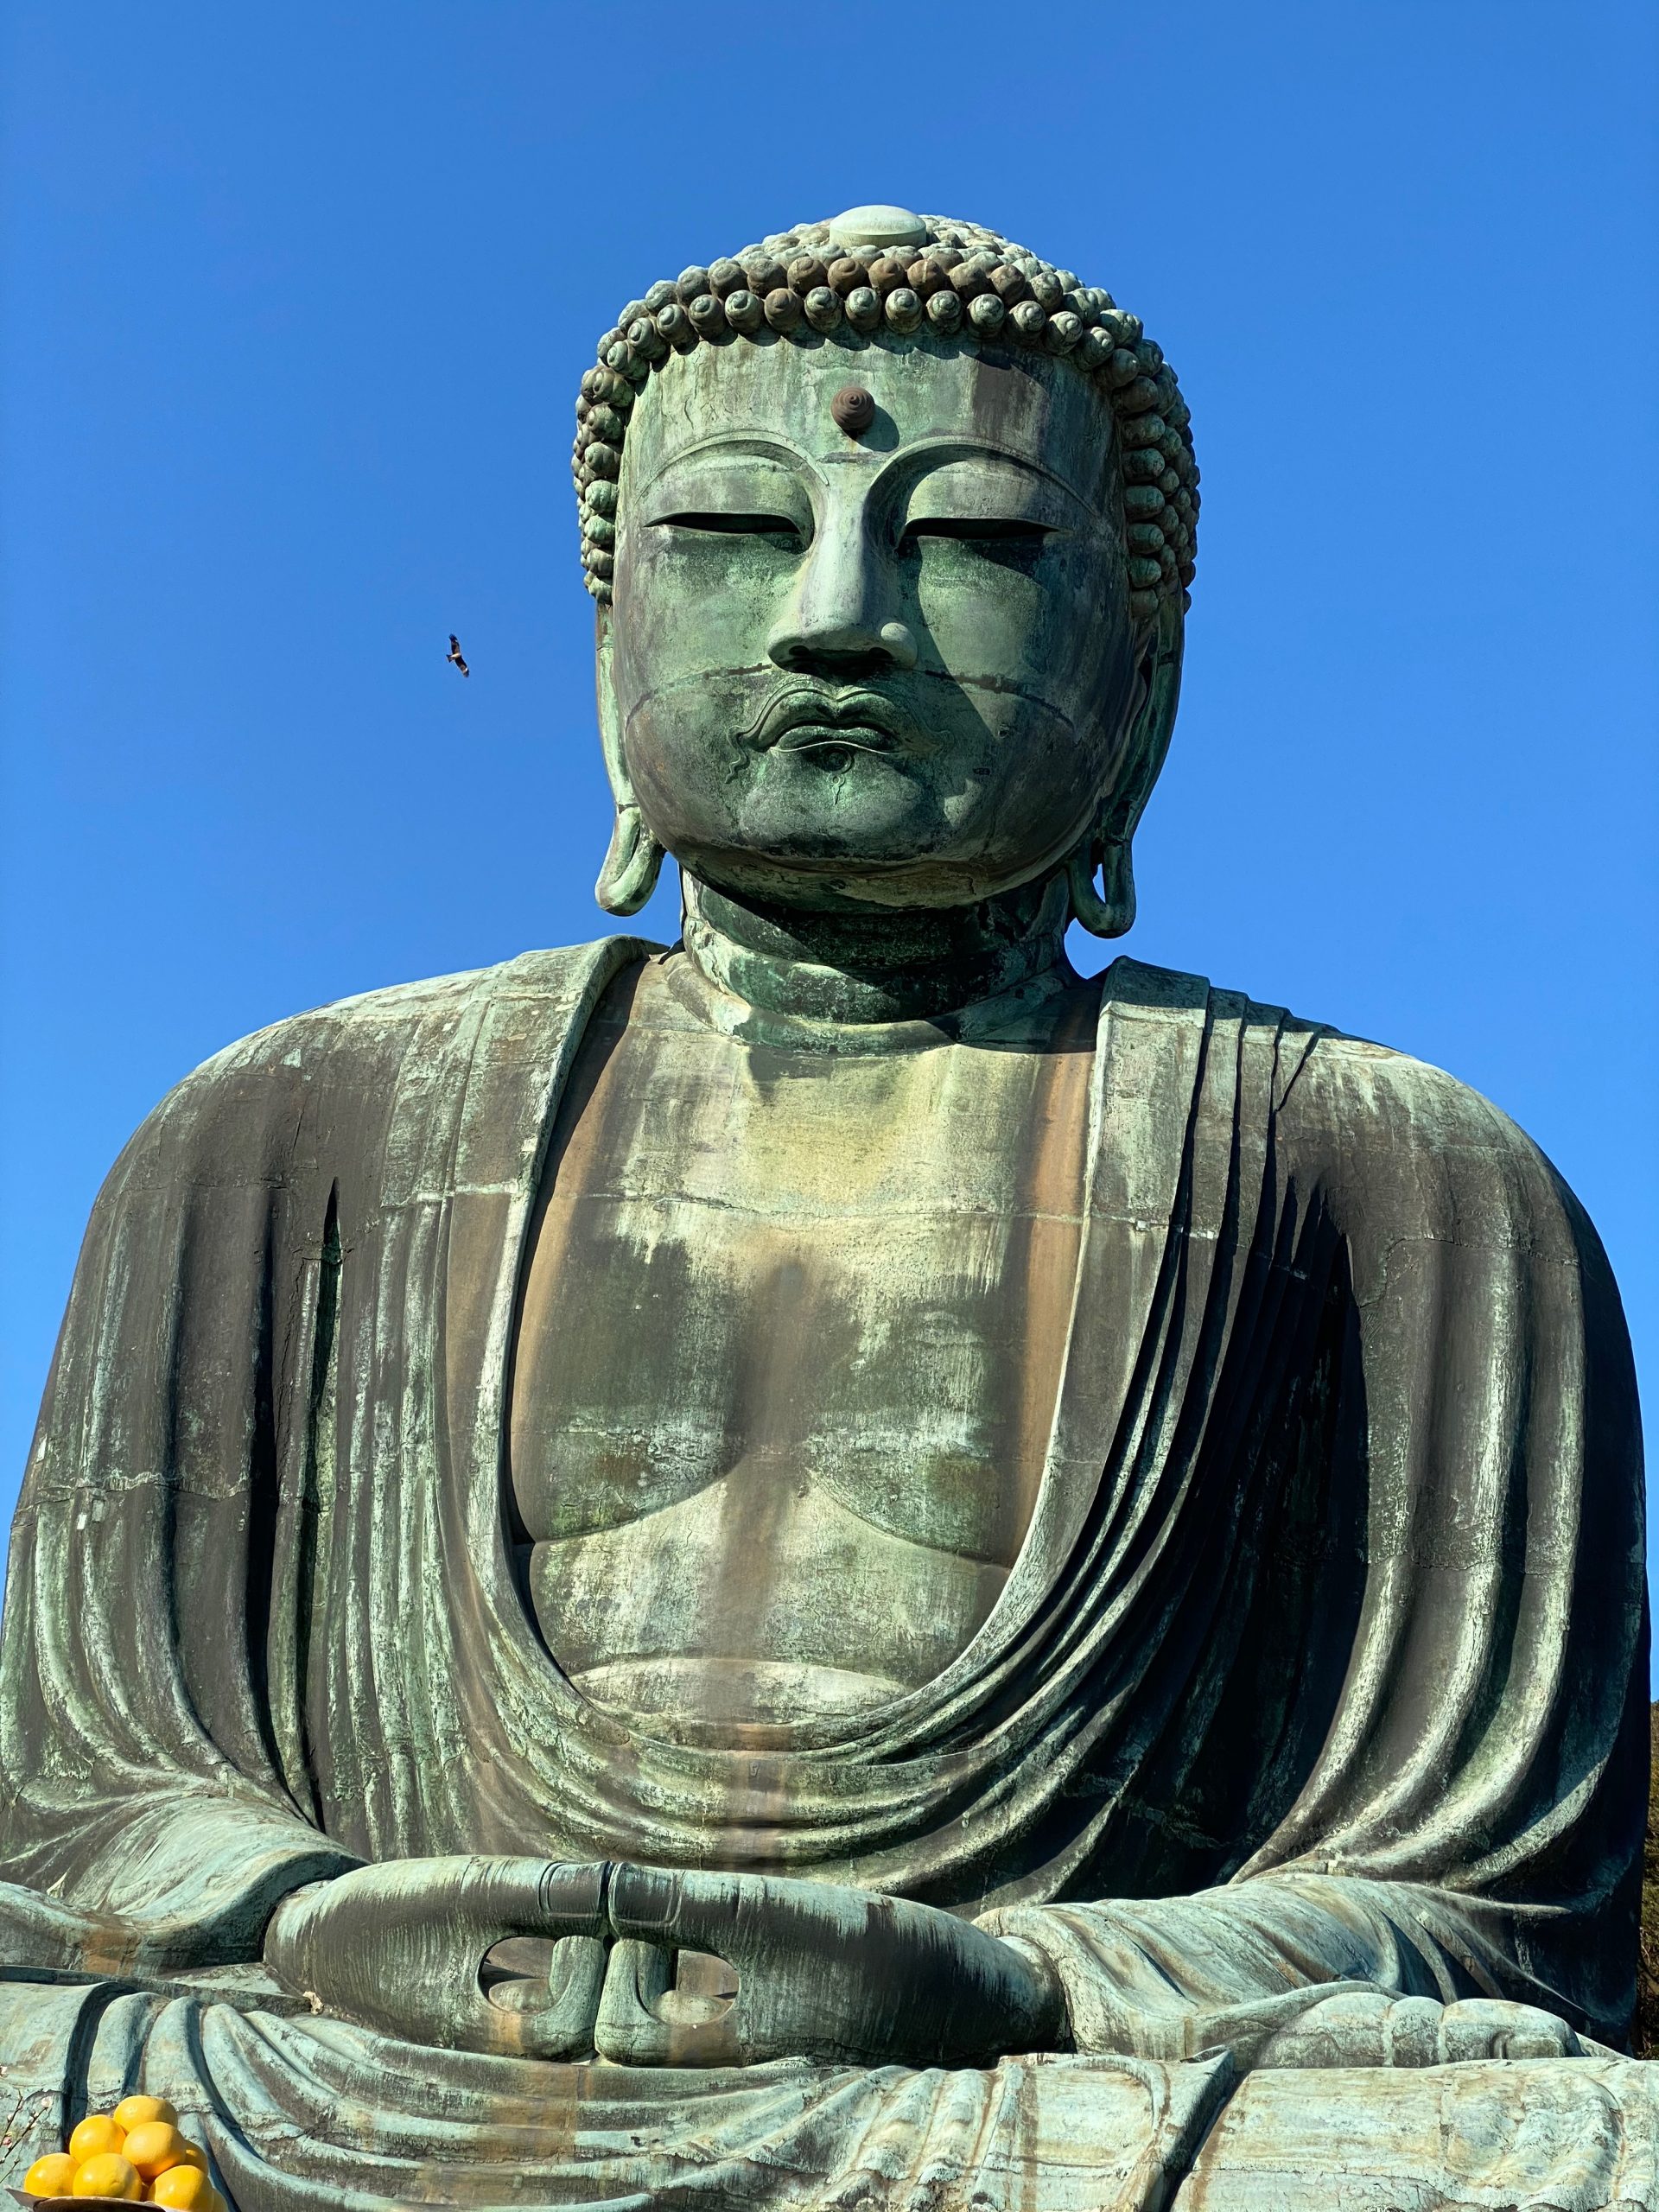 A gigantic statue of buddha with a blue sky behind it and some fruit by its legs